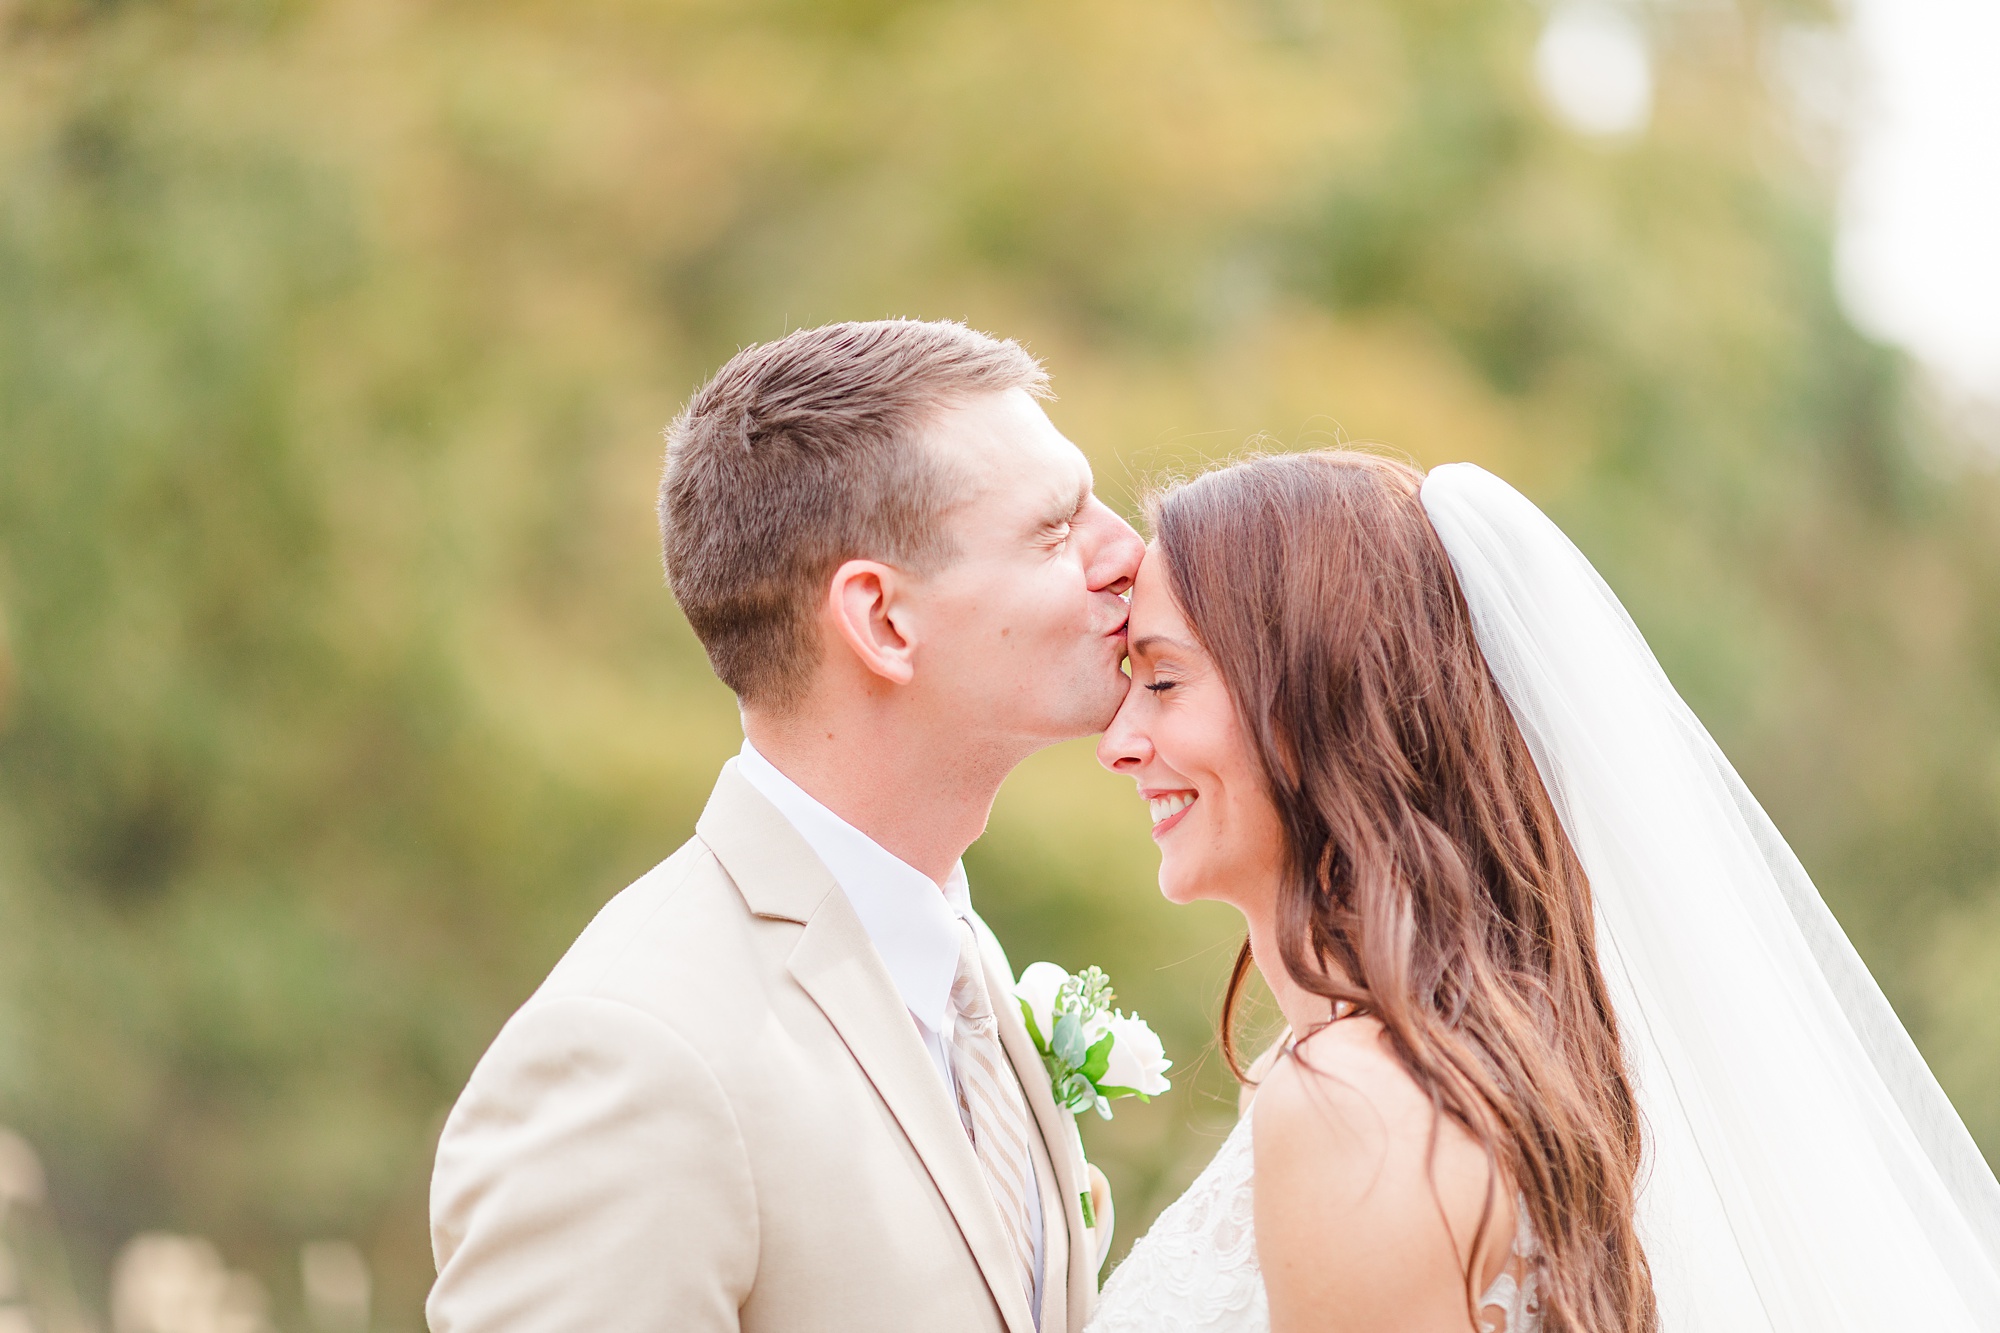 groom kisses bride's forehead during first look in Illinois